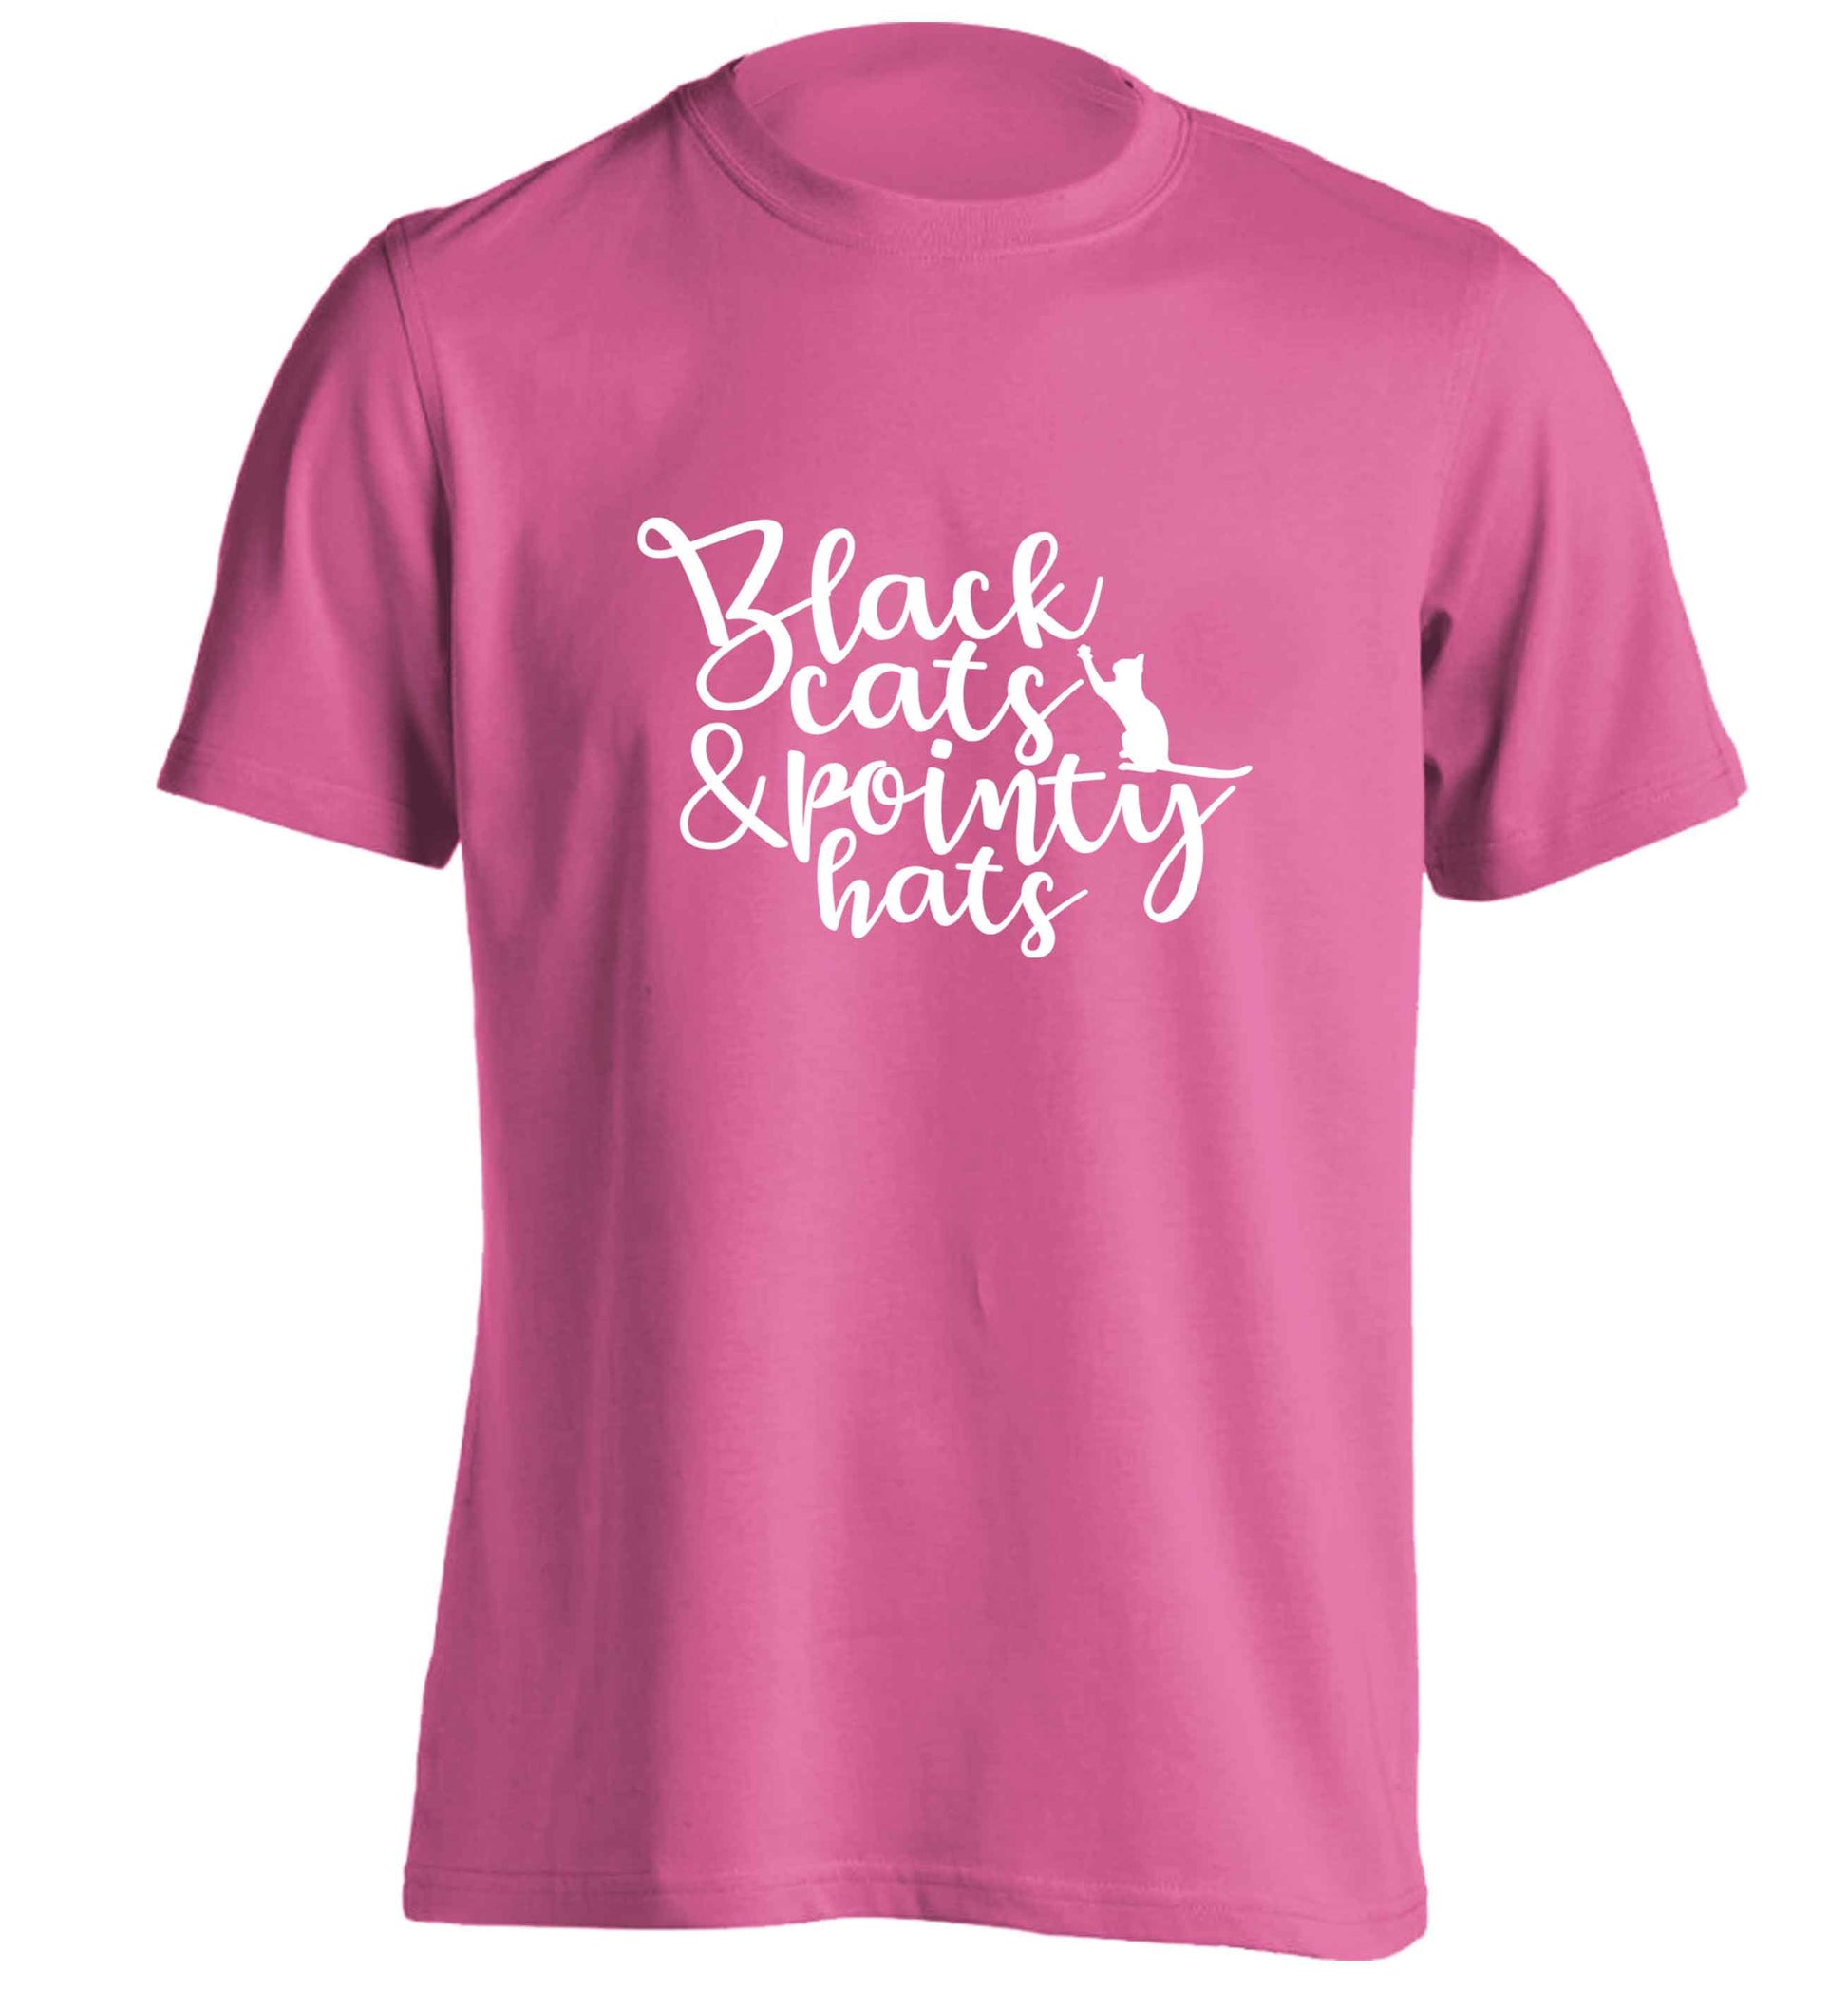 Black cats and pointy hats adults unisex pink Tshirt 2XL